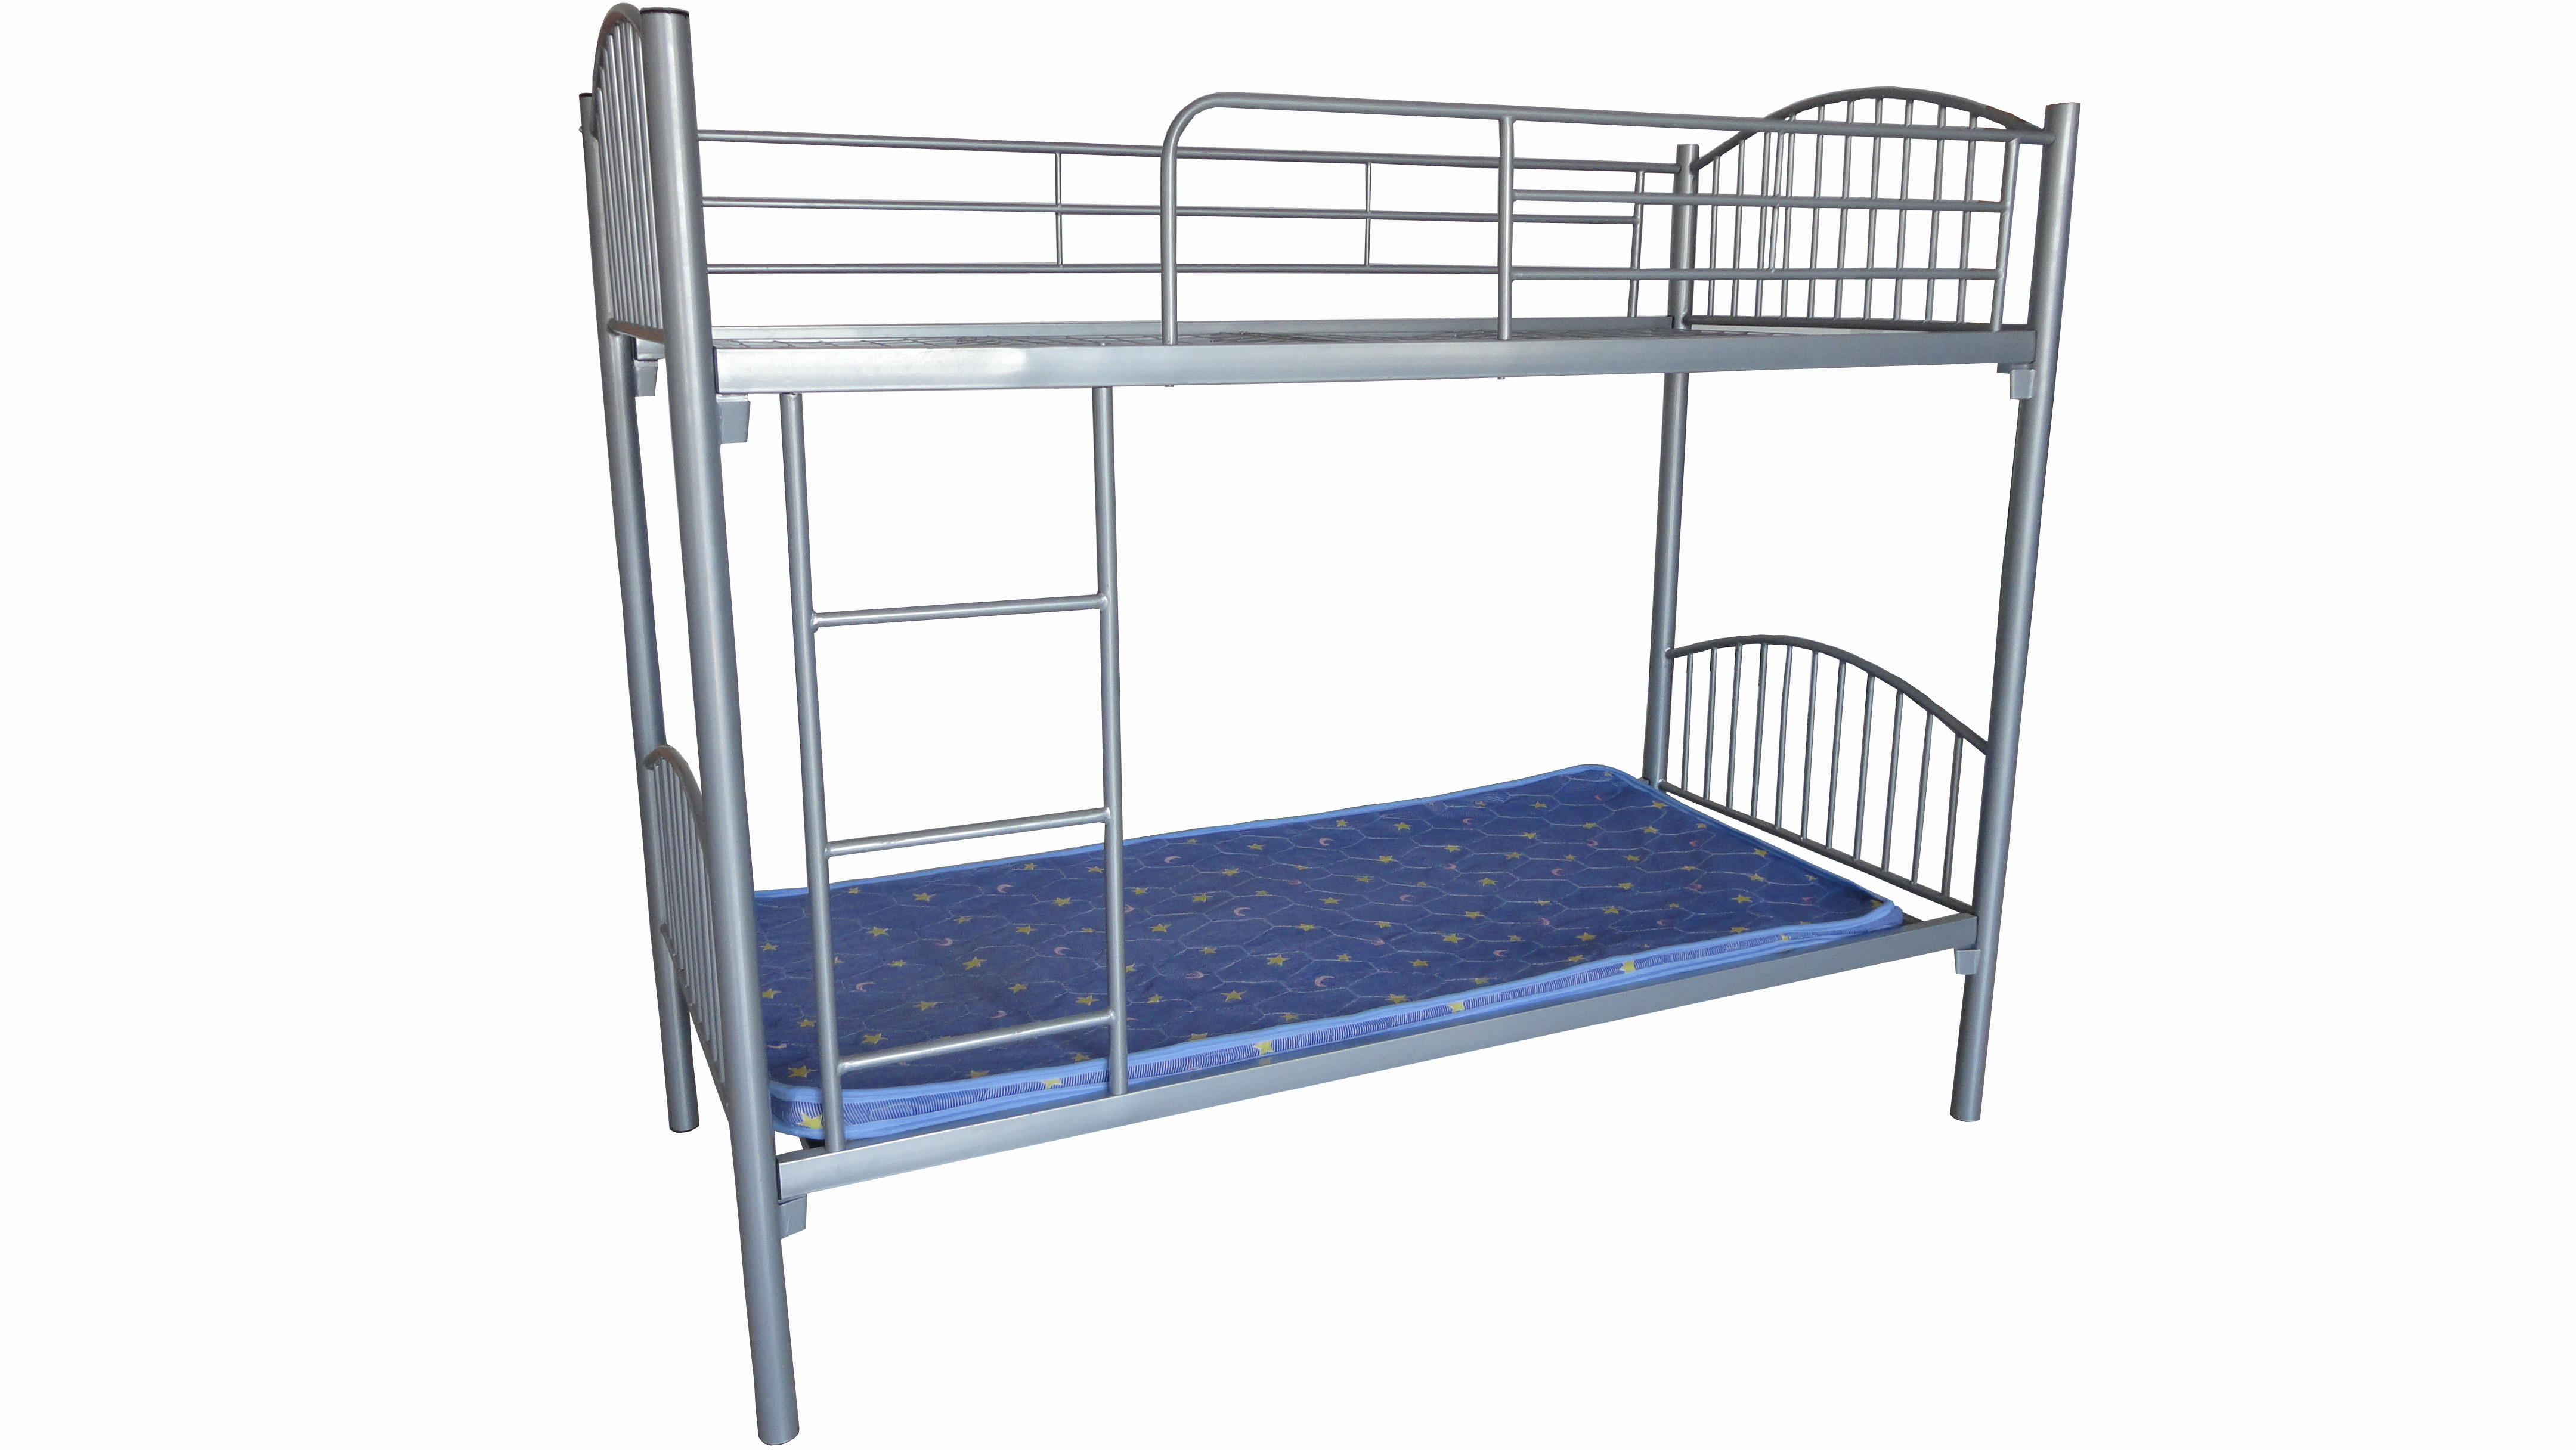 Two Single Iron Bunk Beds Optional Colour No Box Spring Needed ISO9001